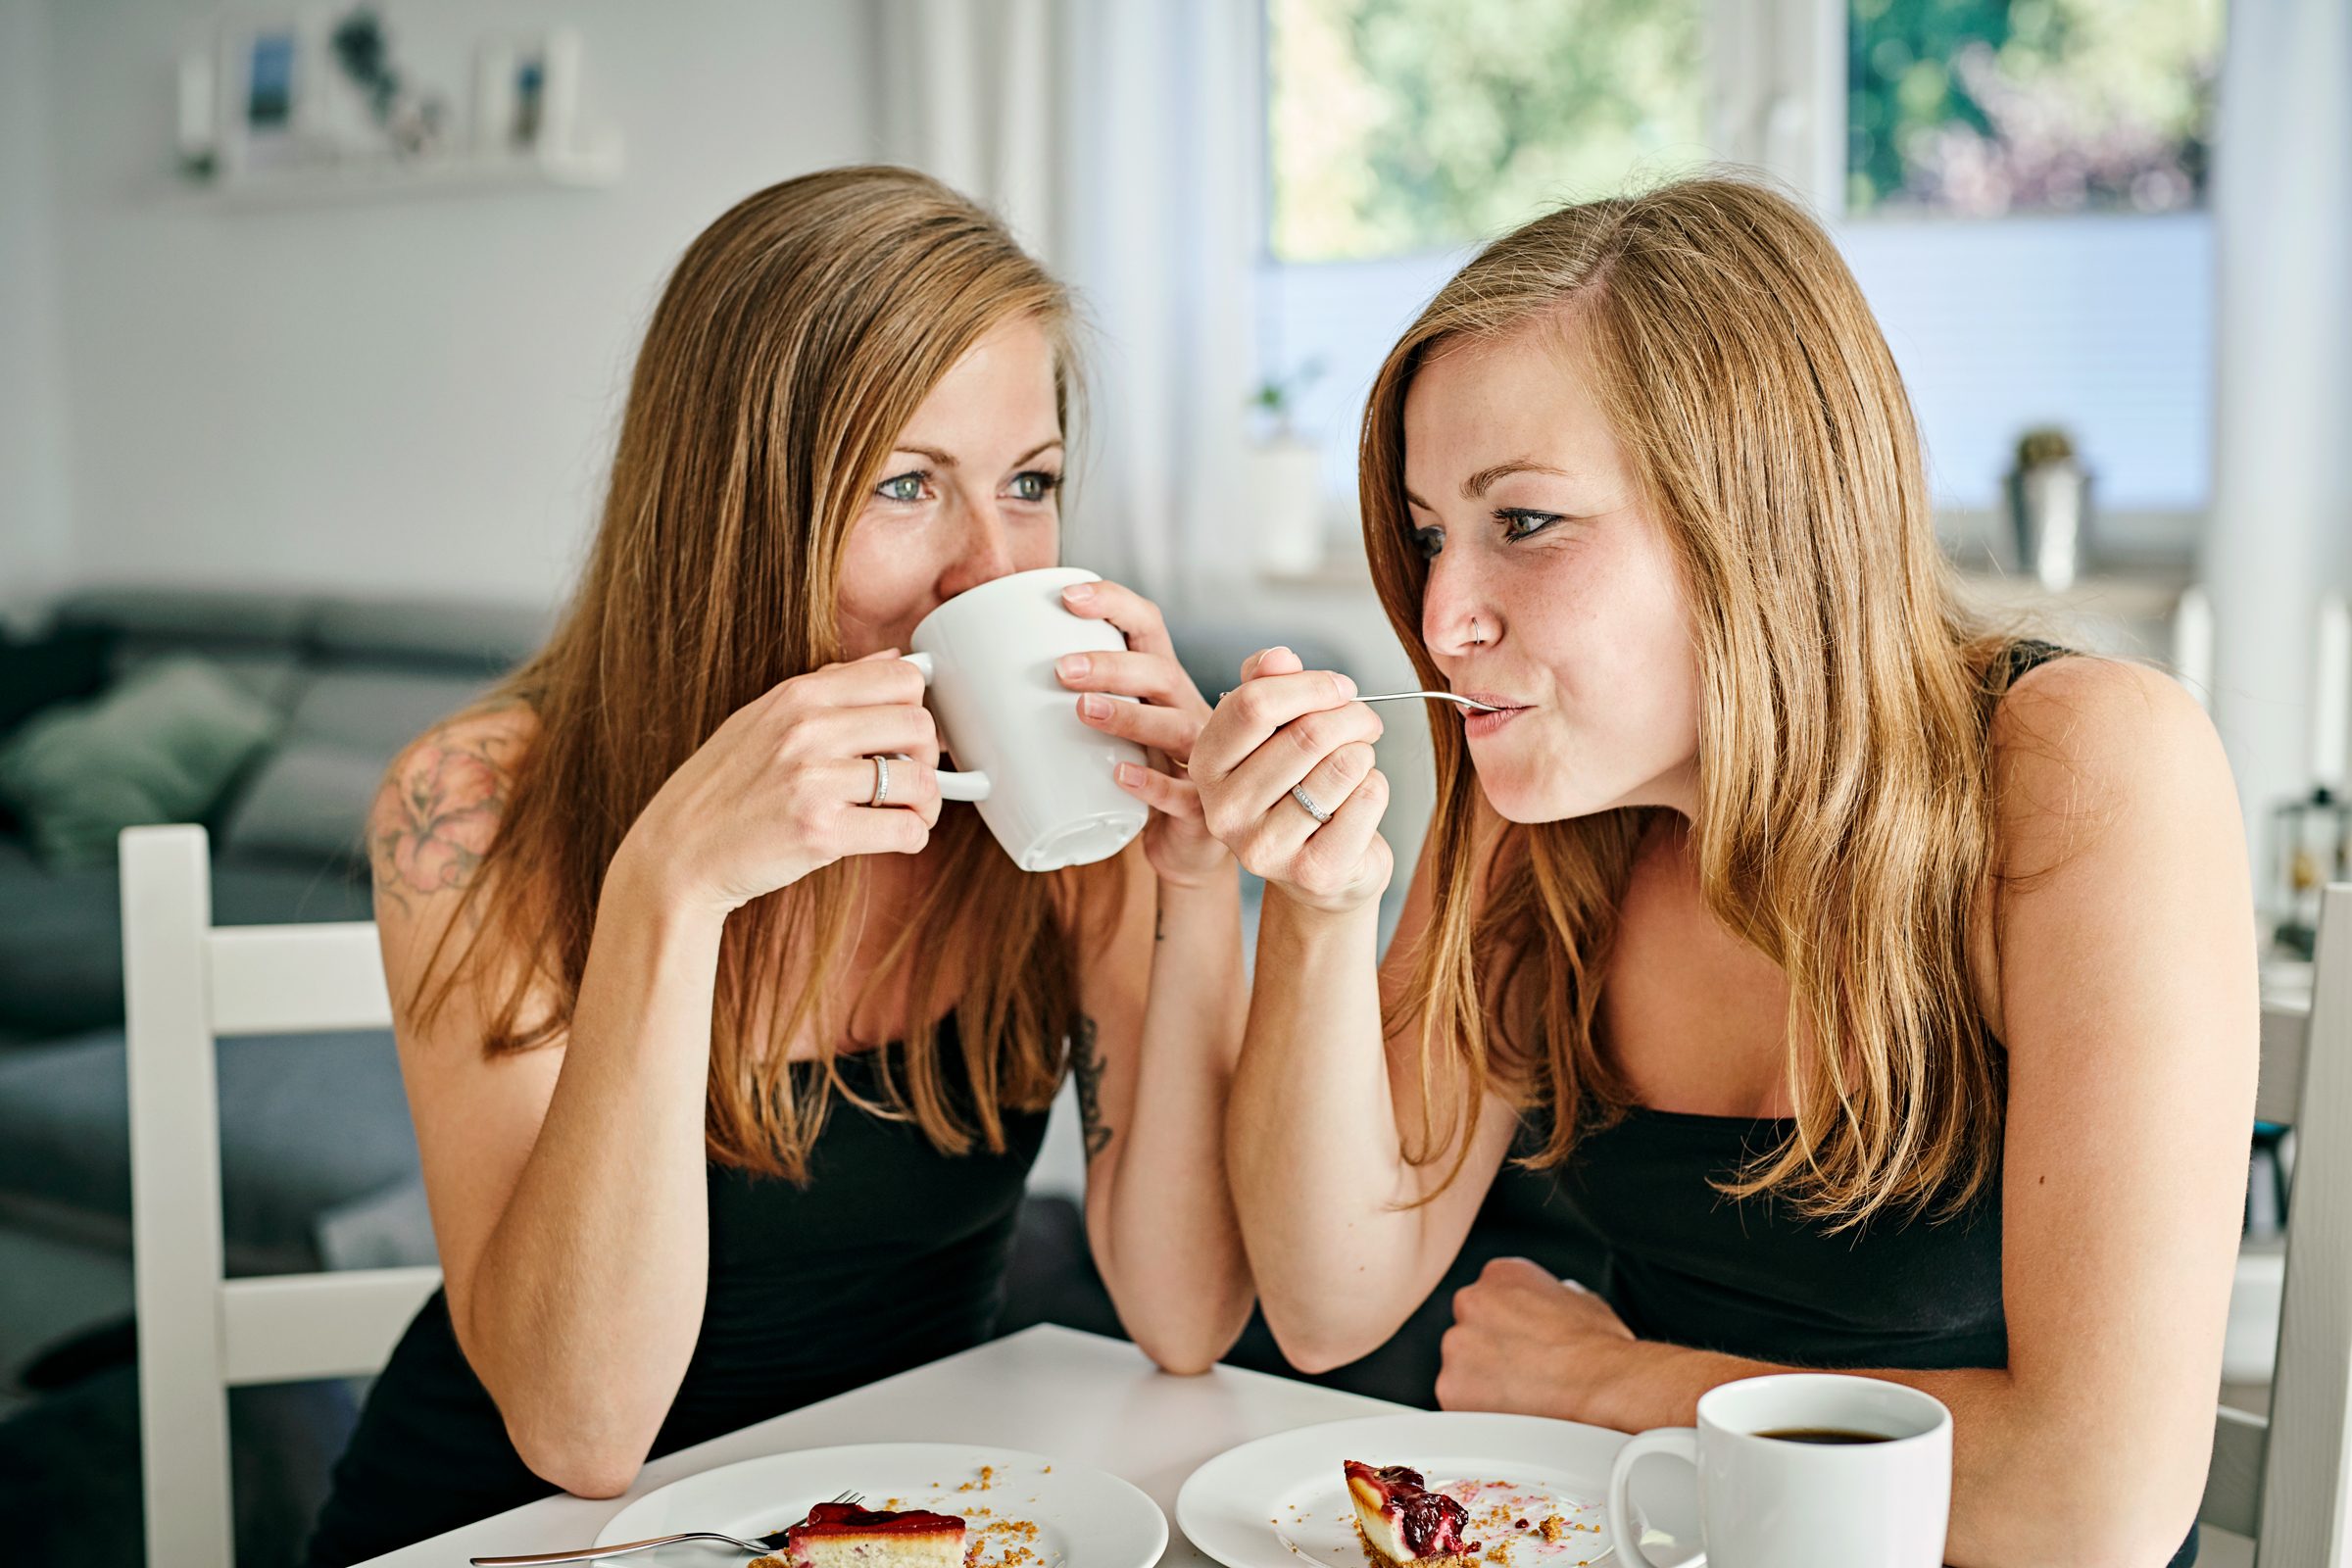 Have that coffee after breakfast, research suggests